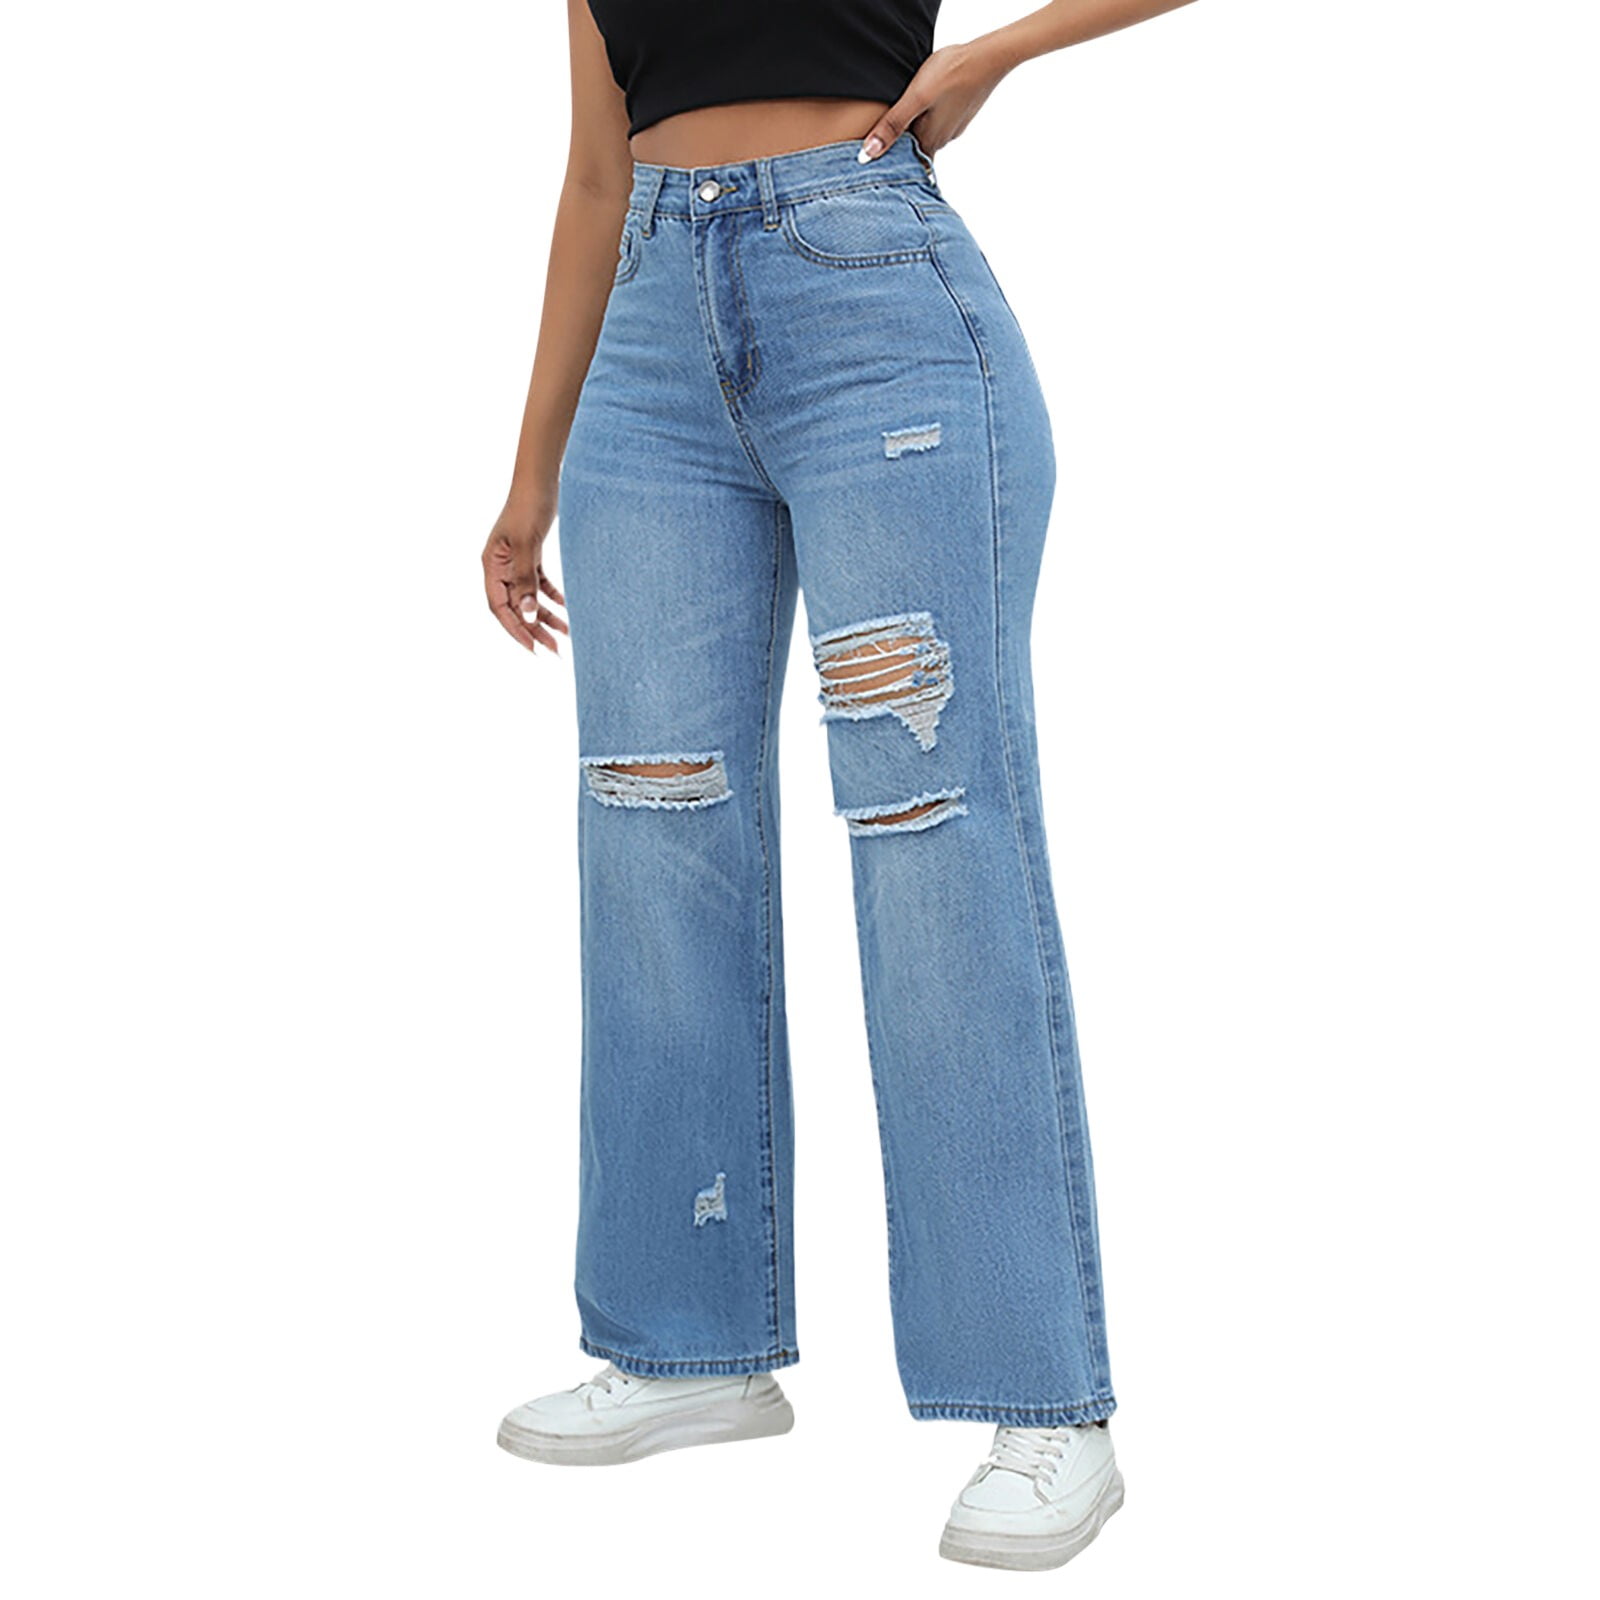 QYZEU High Rise Jeans for Women Straight Leg Relaxed Fit Pants Ripped ...